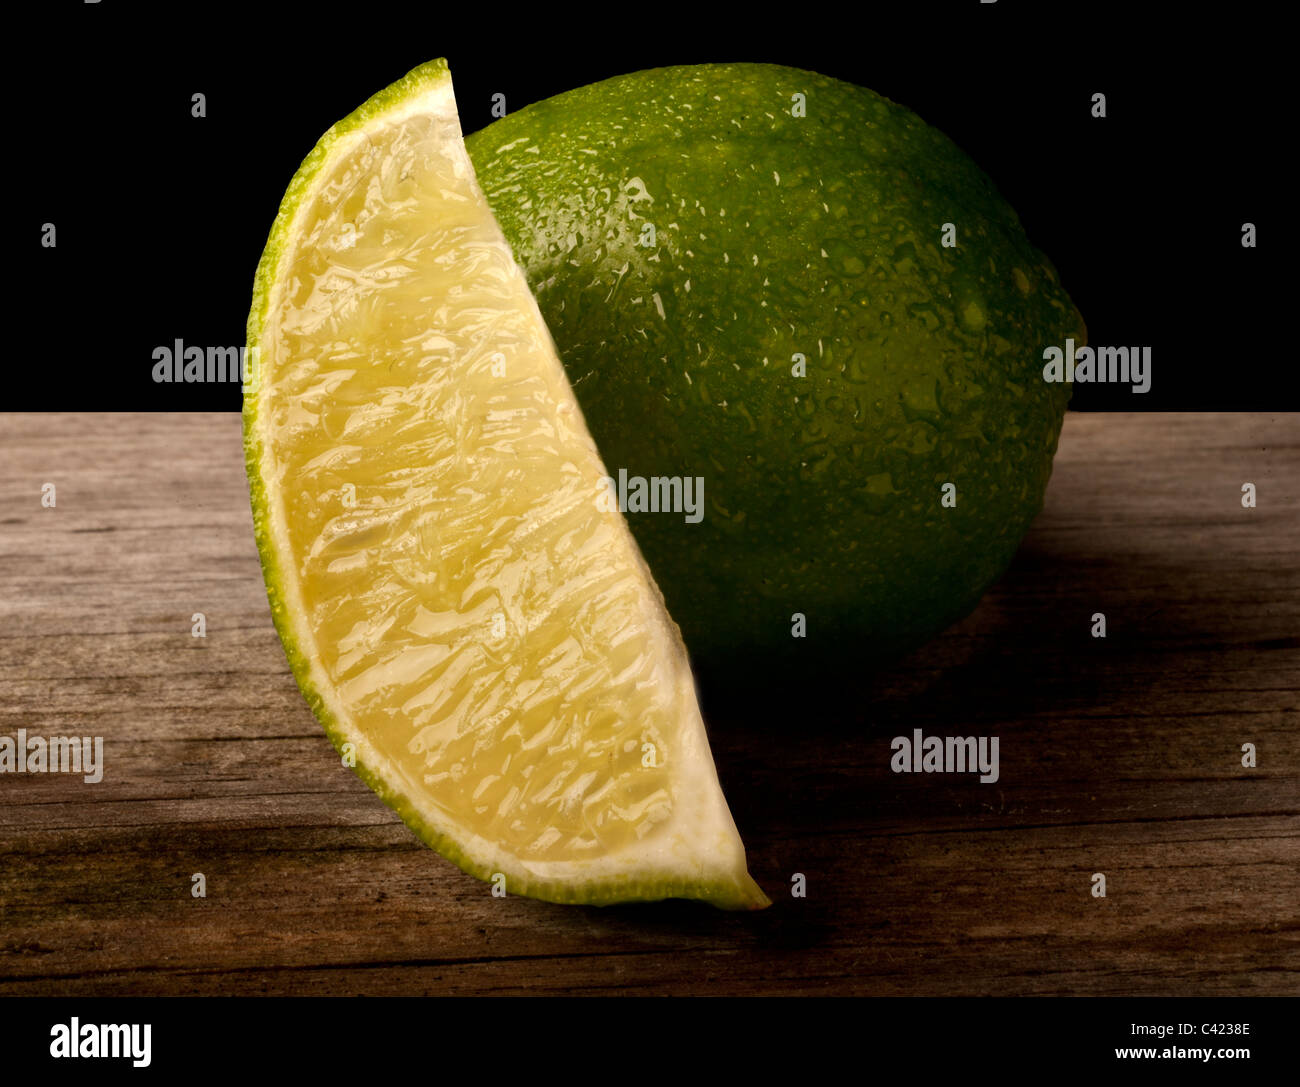 Juicy Limes limes, Foodx Banque D'Images